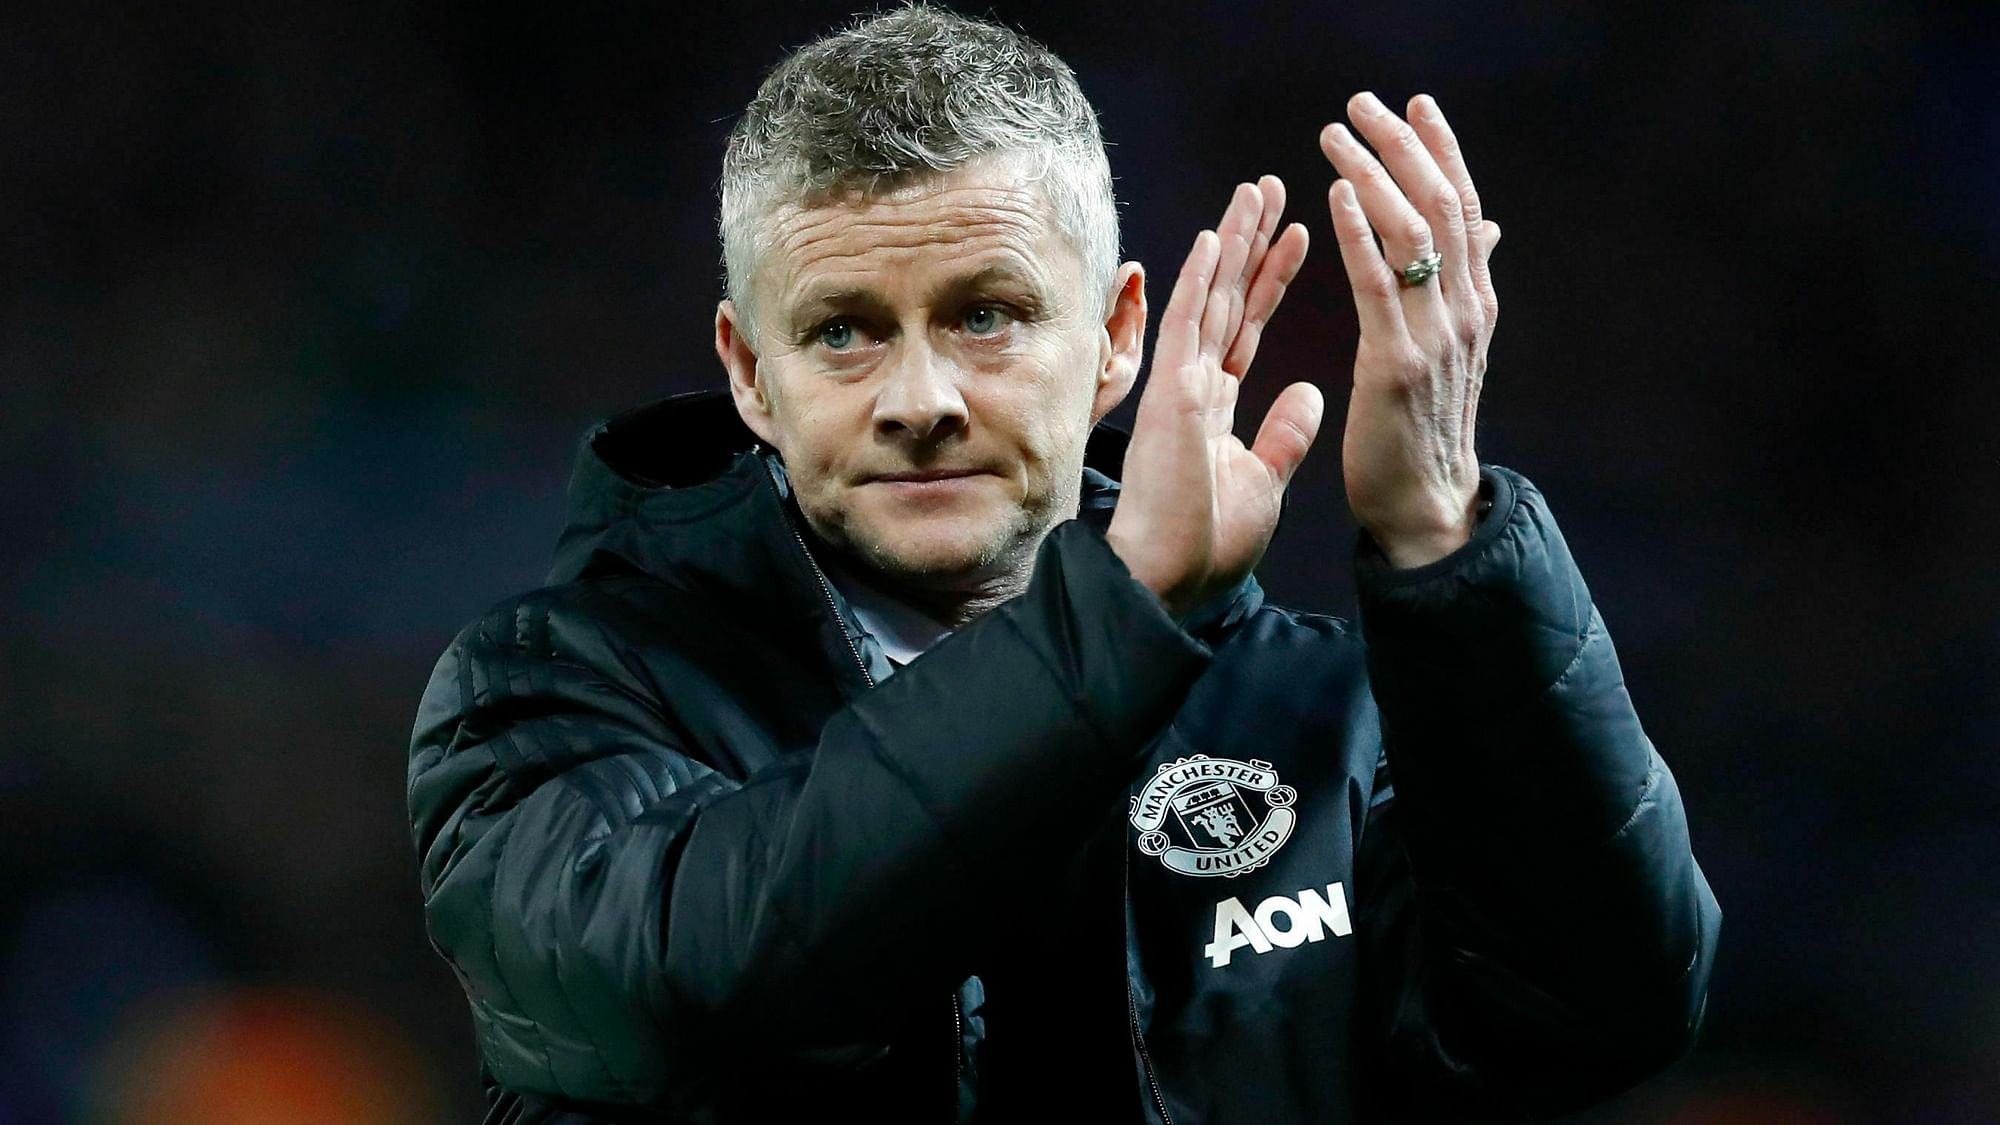 Manchester United caretaker manager Ole Gunnar Solskjaer leaves the field after defeat in the Champions League round of 16 match against Paris Saint Germain at Old Trafford stadium in Manchester, England, Tuesday, Feb. 12, 2019.